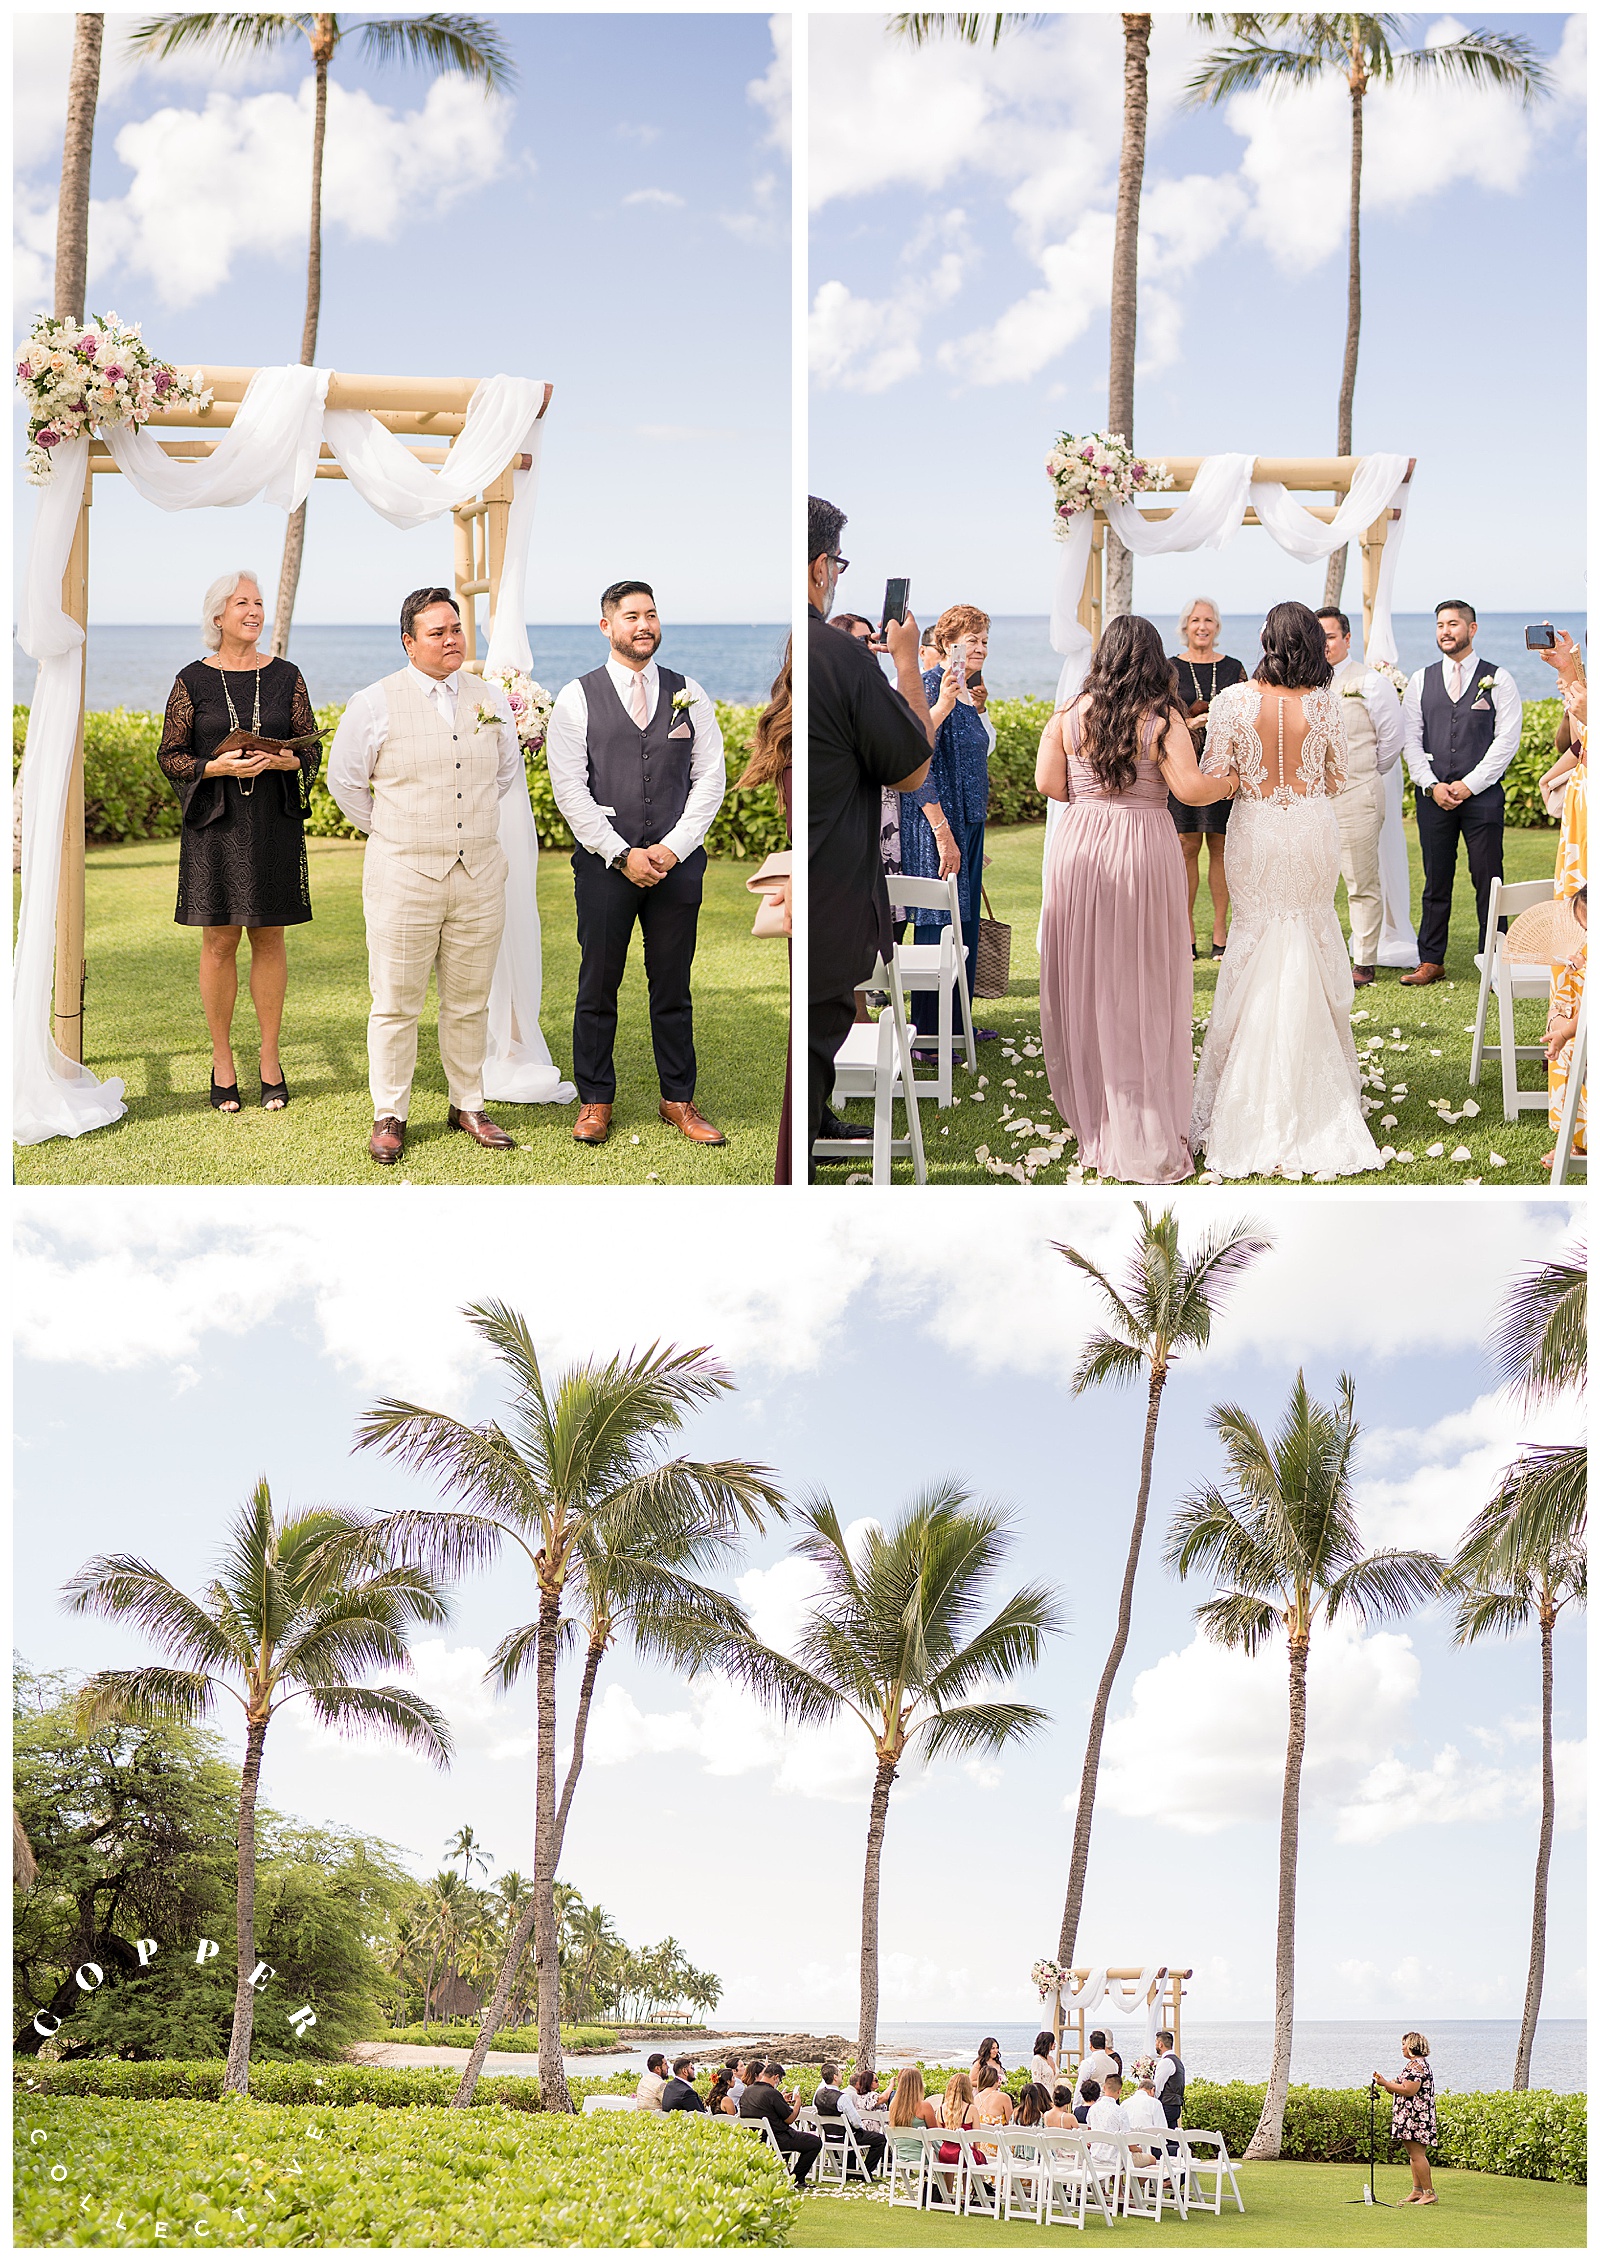 An Outdoor Morning Wedding Ceremony at Paradise Cove Luau